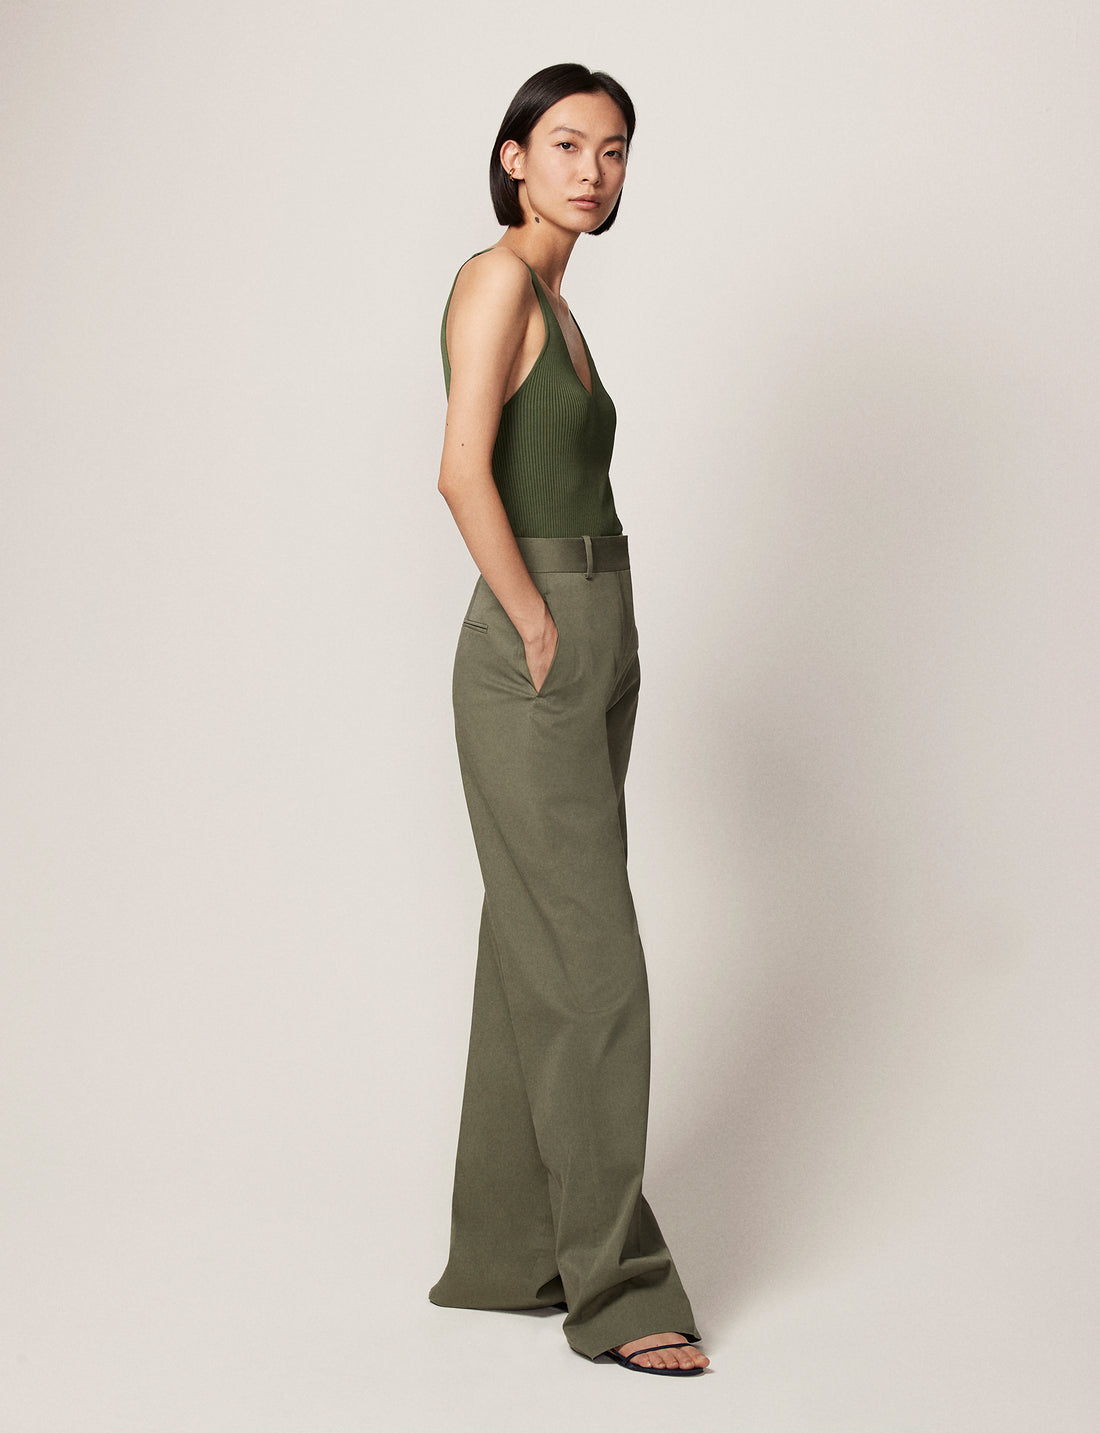 Product image6 with color olive-green